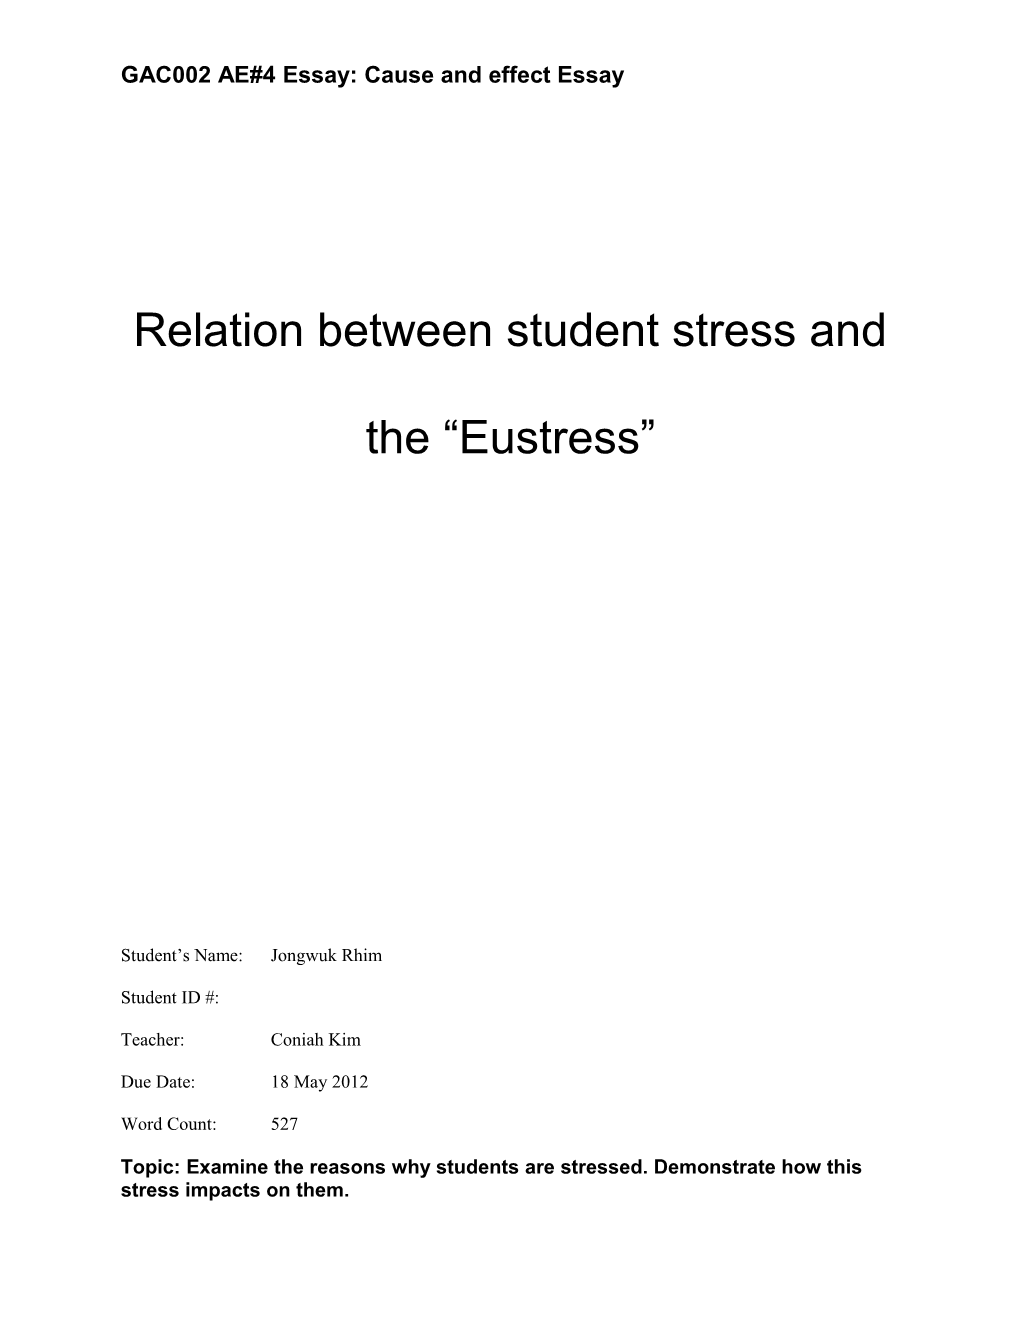 Relation Between Student Stress and the Eustress